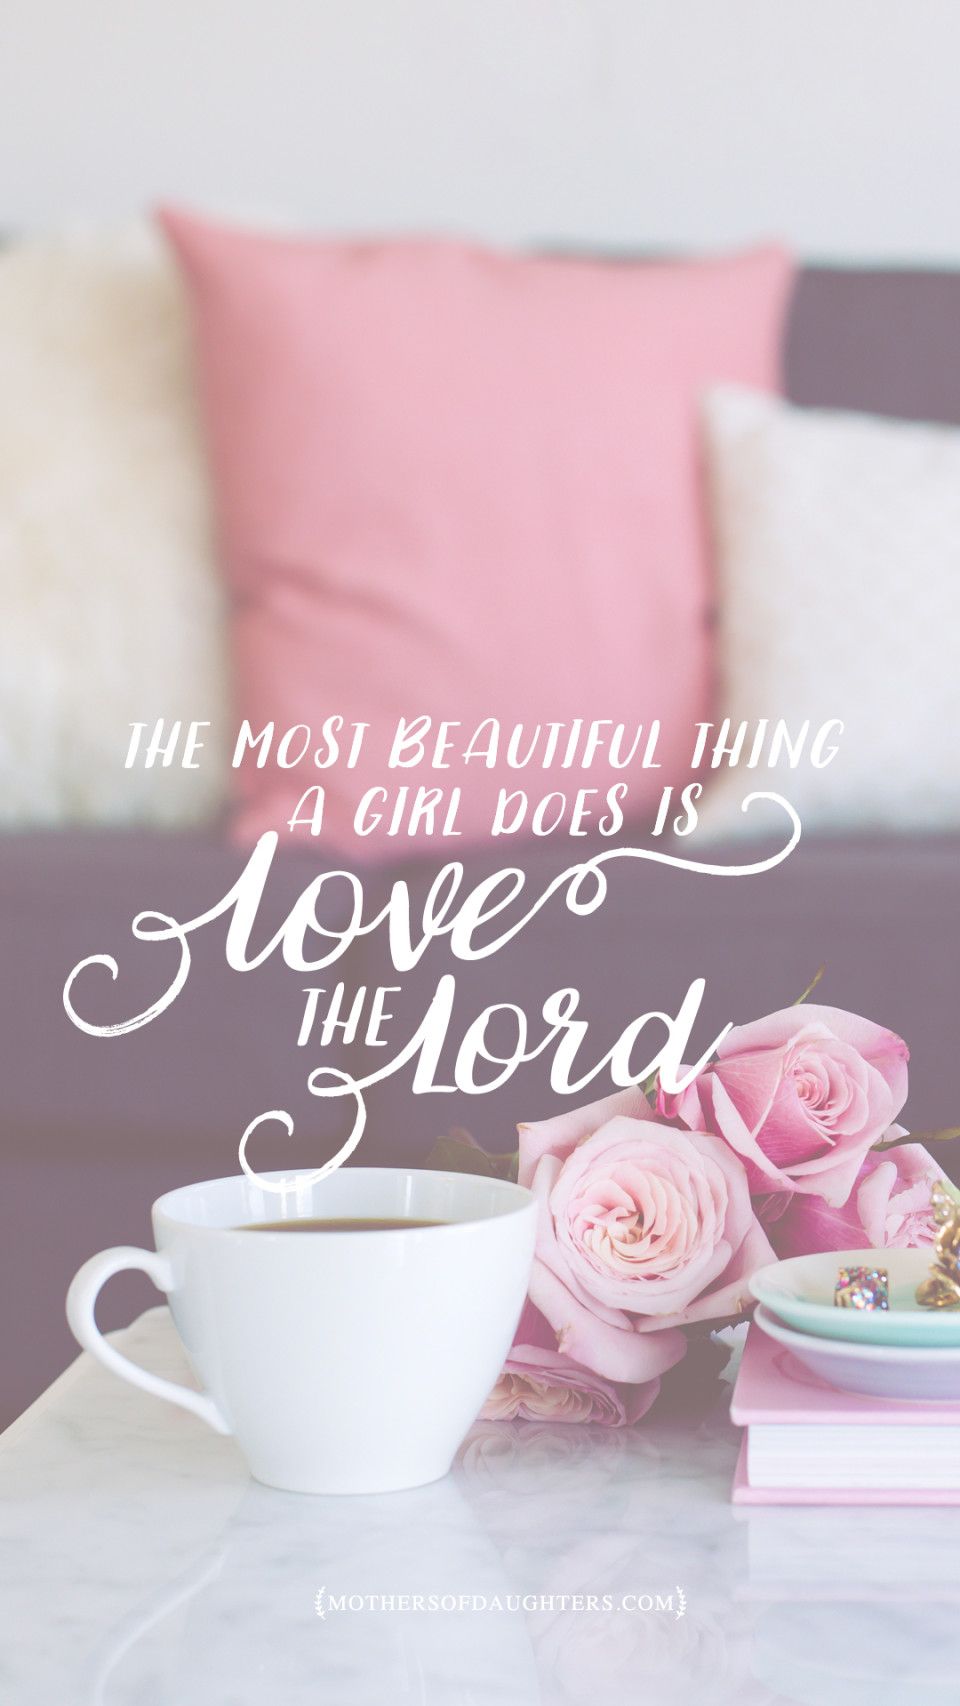 The Most Beautiful Thing A Girl Does Is Love The Lord {Free Lockscreens}. Mothers of Daughters. Christian wallpaper, Bible quotes, Faith